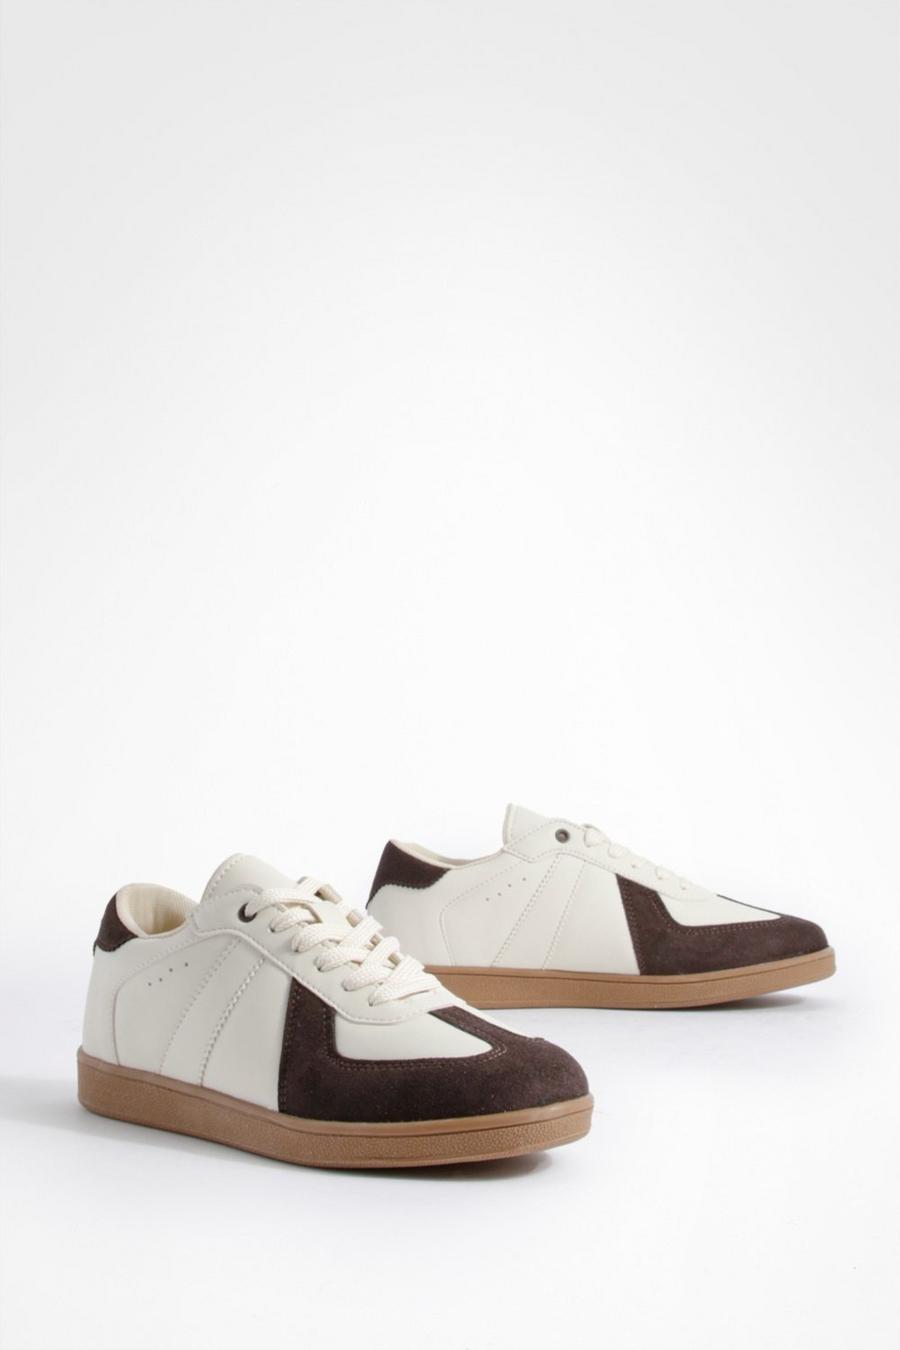 Contrast Panel Gum Sole Flat Trainers image number 1